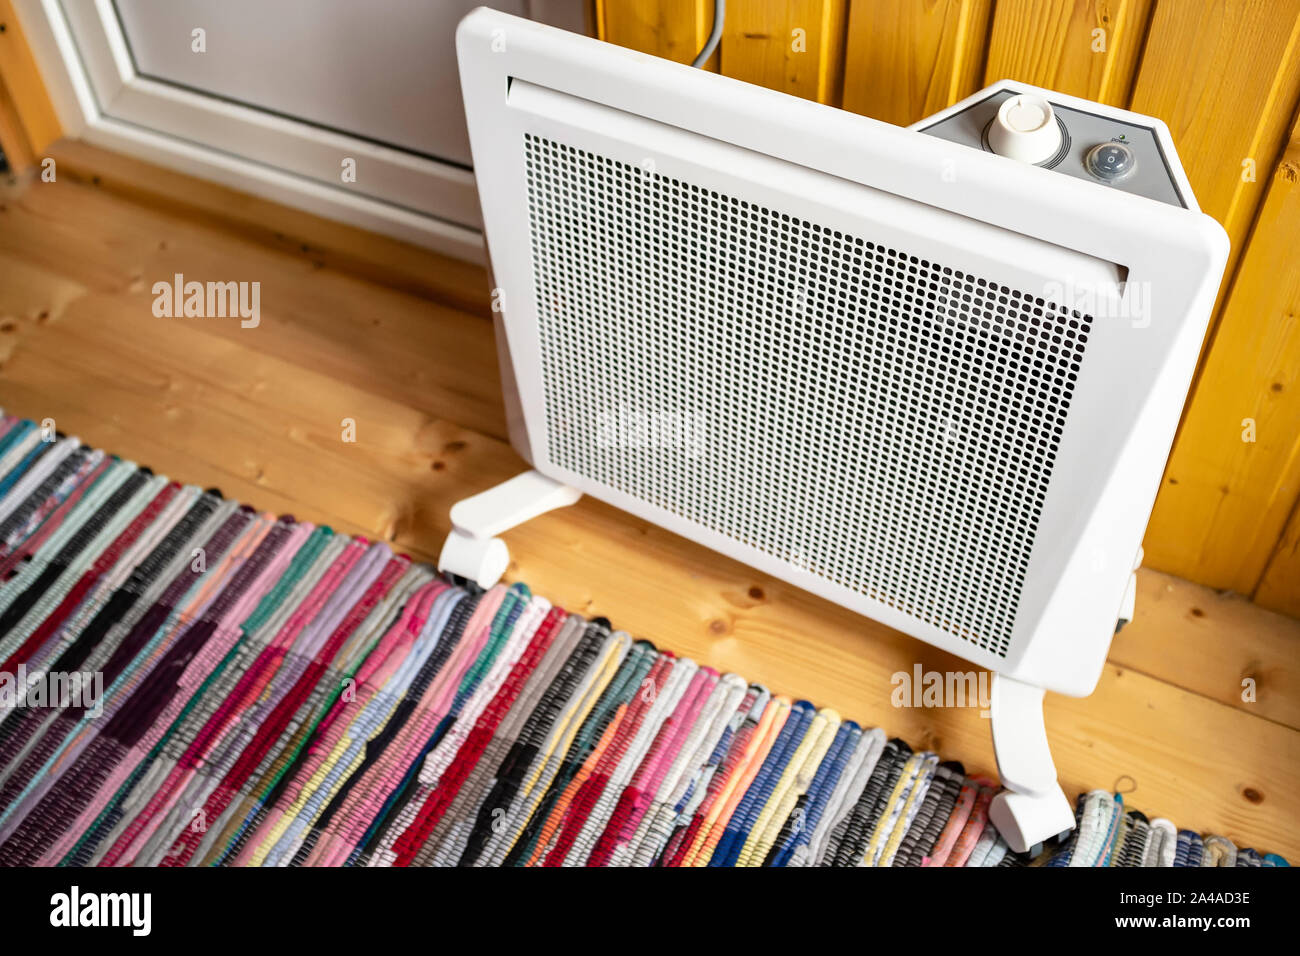 White electric radiator with a thermostat is placed on the floor covered with a colored rug, next to a wall and door, in a wooden country house. Stock Photo